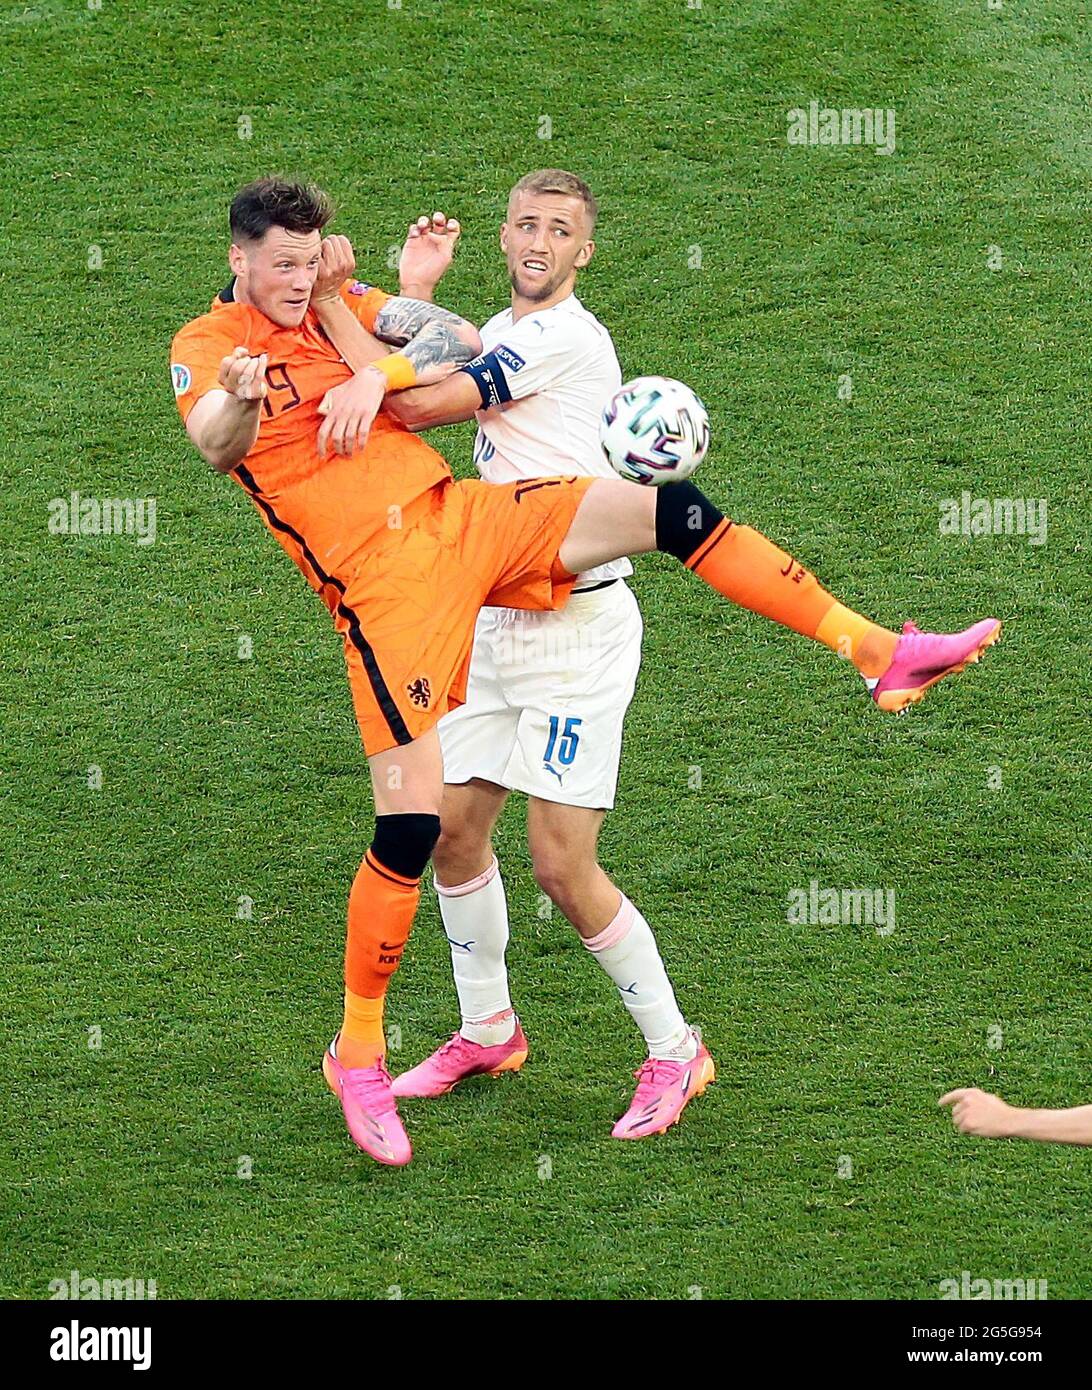 Netherlands's Wout Weghorst and Czech Republic's Tomas Soucek battle for the ball during the UEFA Euro 2020 round of 16 match held at the Puskas Arena in Budapest, Hungary. Picture date: Sunday June 27, 2021. Stock Photo